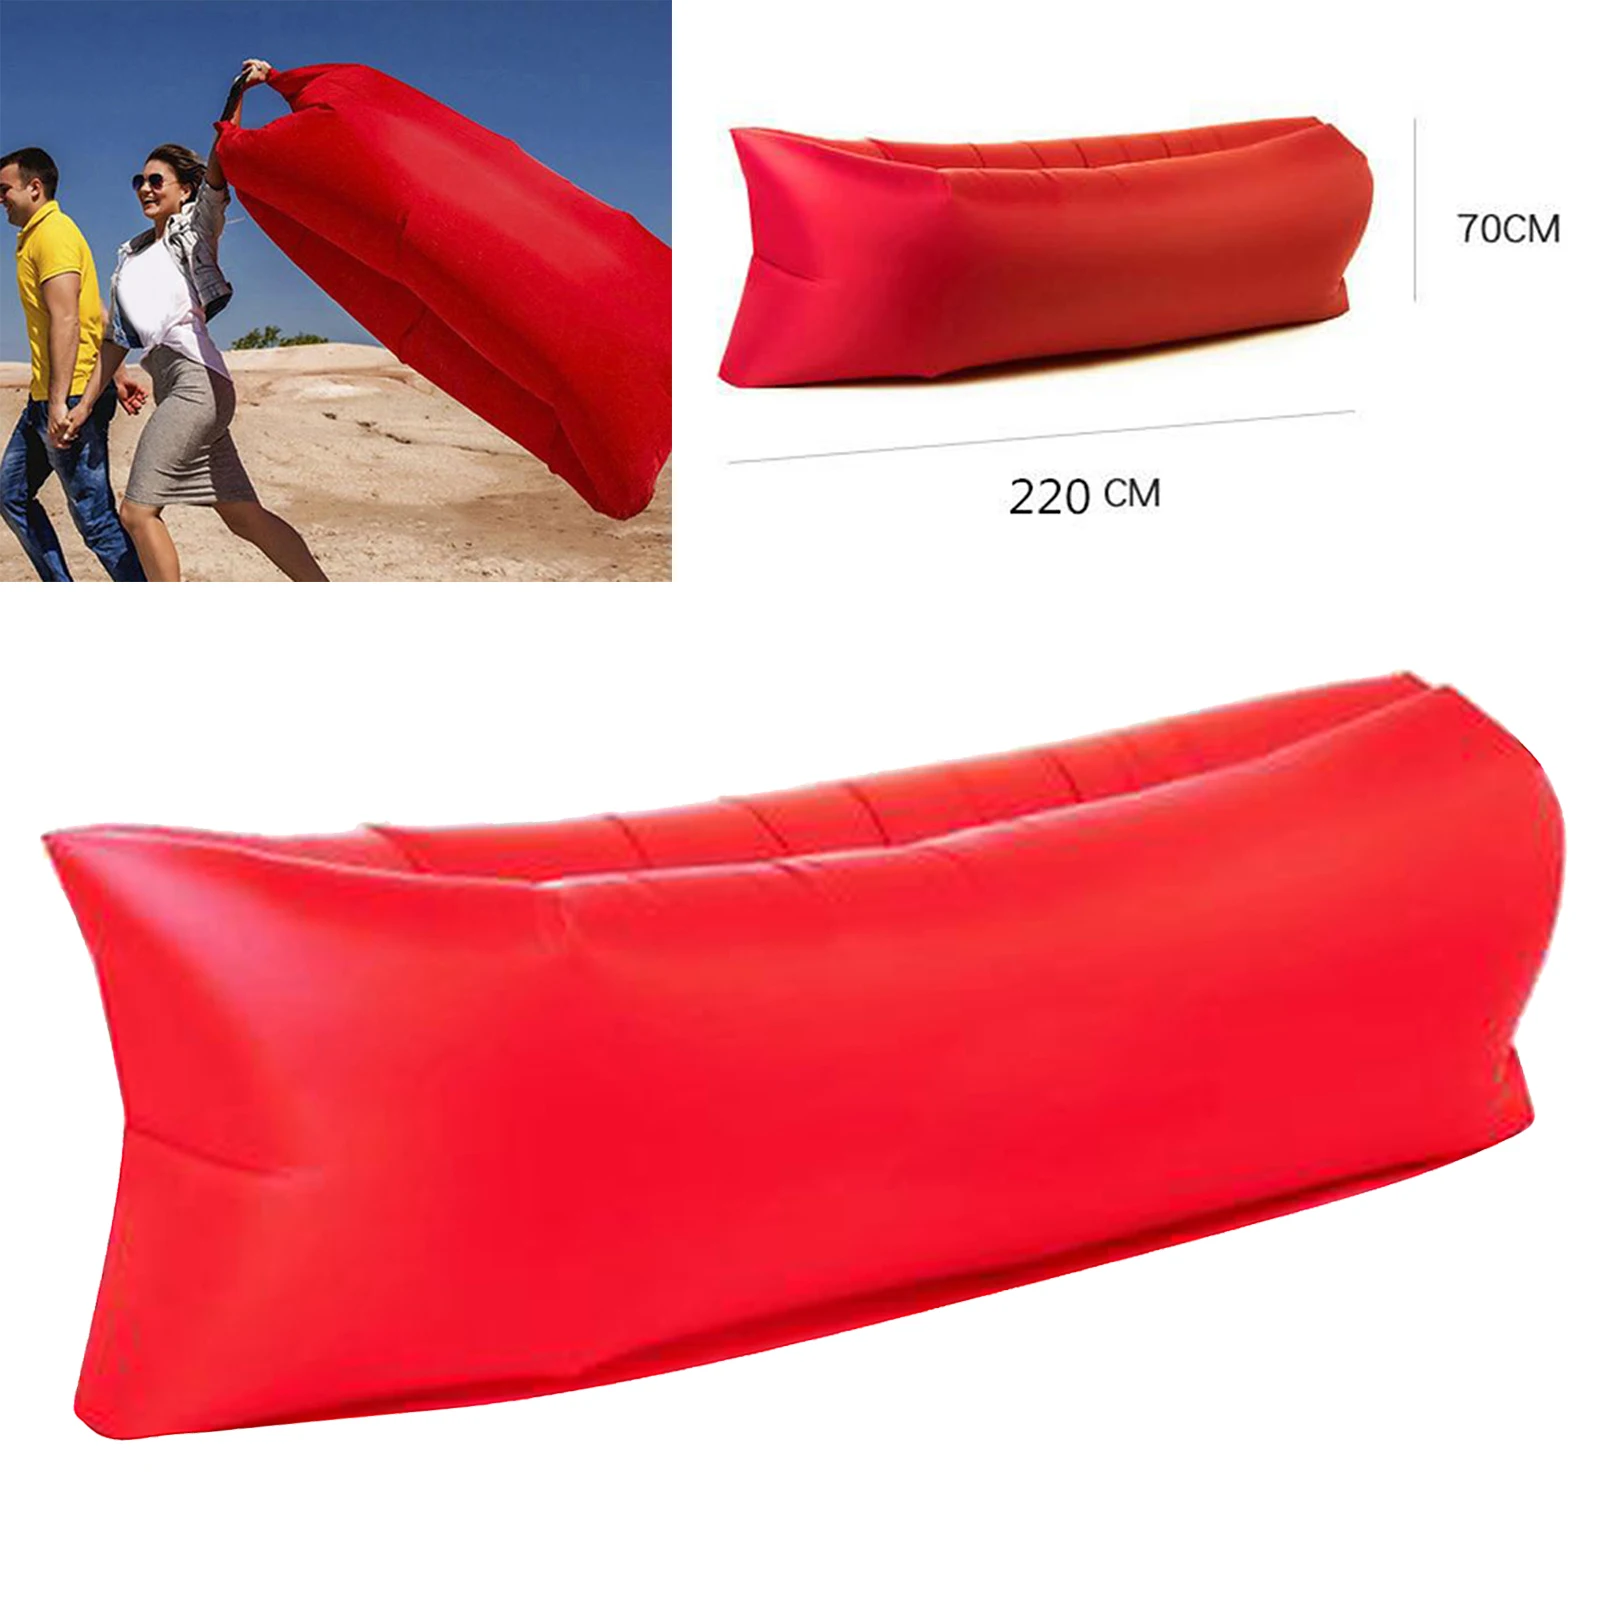 Camping Inflatable Lounger Air Sofa Portable Water Proof Anti-Air Leaking Couch for Pool Travel Hiking Lakeside Picnics Beach